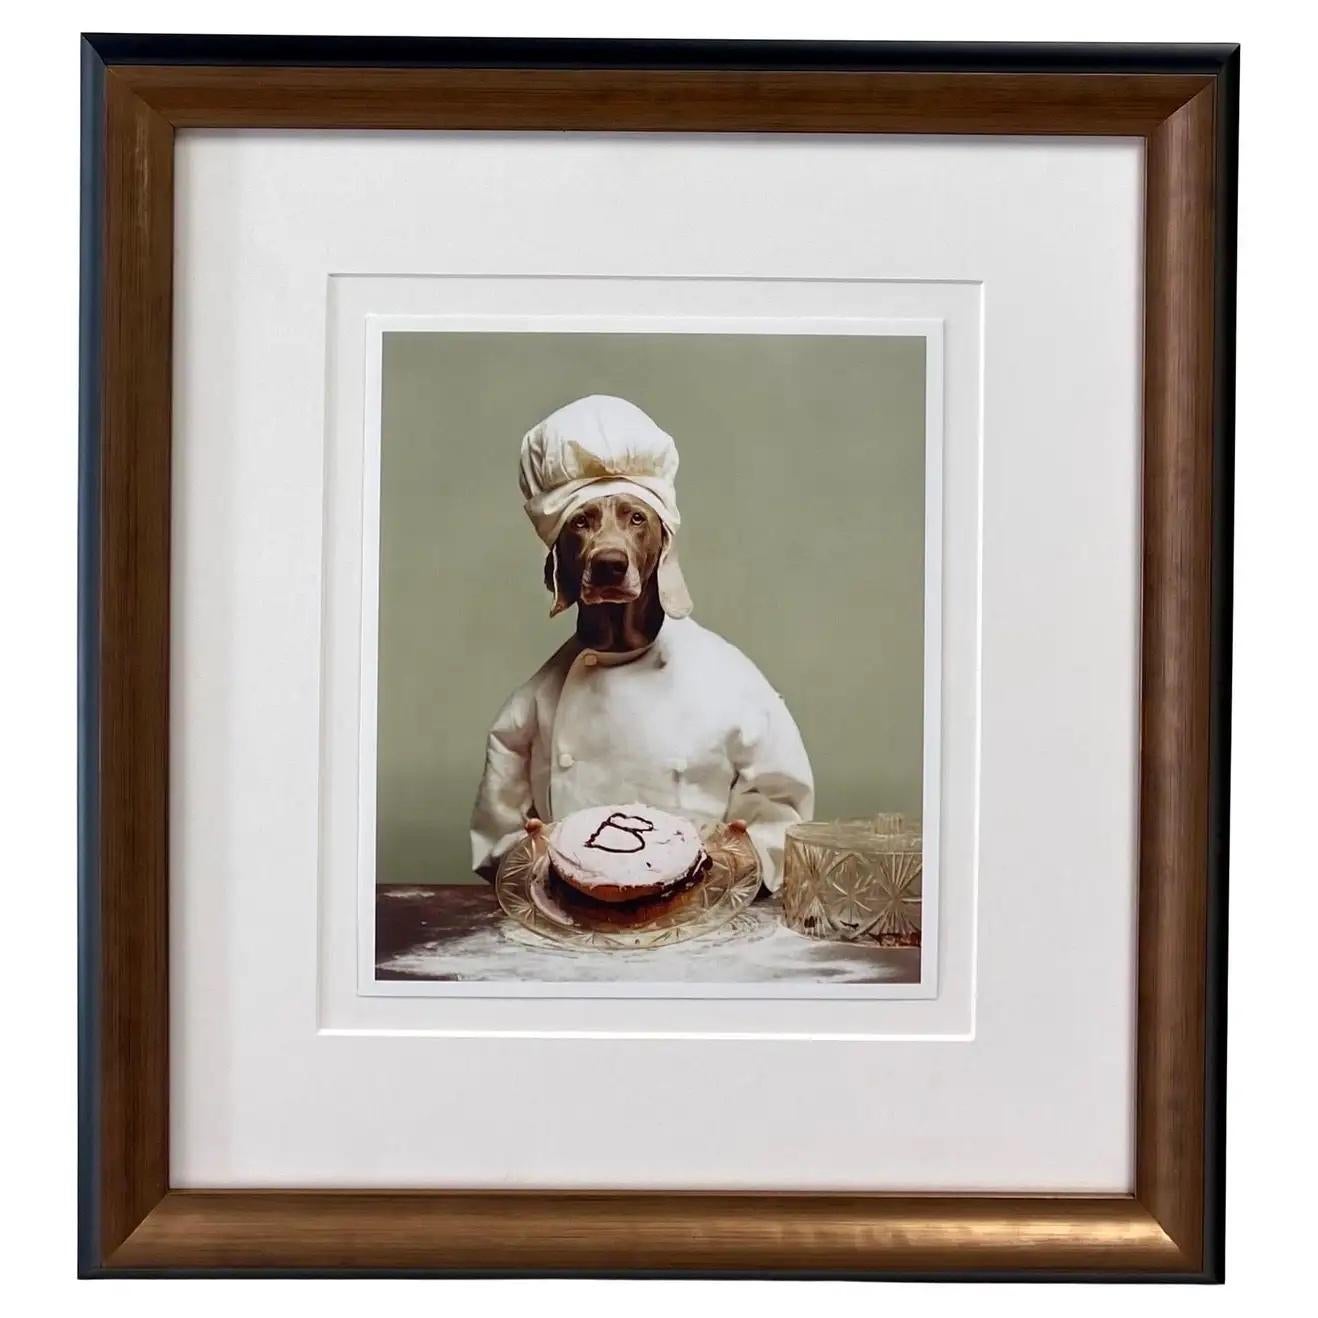 William Wegman ( American, 1943) original limited edition color photography titled "B for Baker " inspired by nursery rhyme "Pat a cake" from William Wegman's mother Goose series 1996-2012. The art work comes with a certificate of authenticity